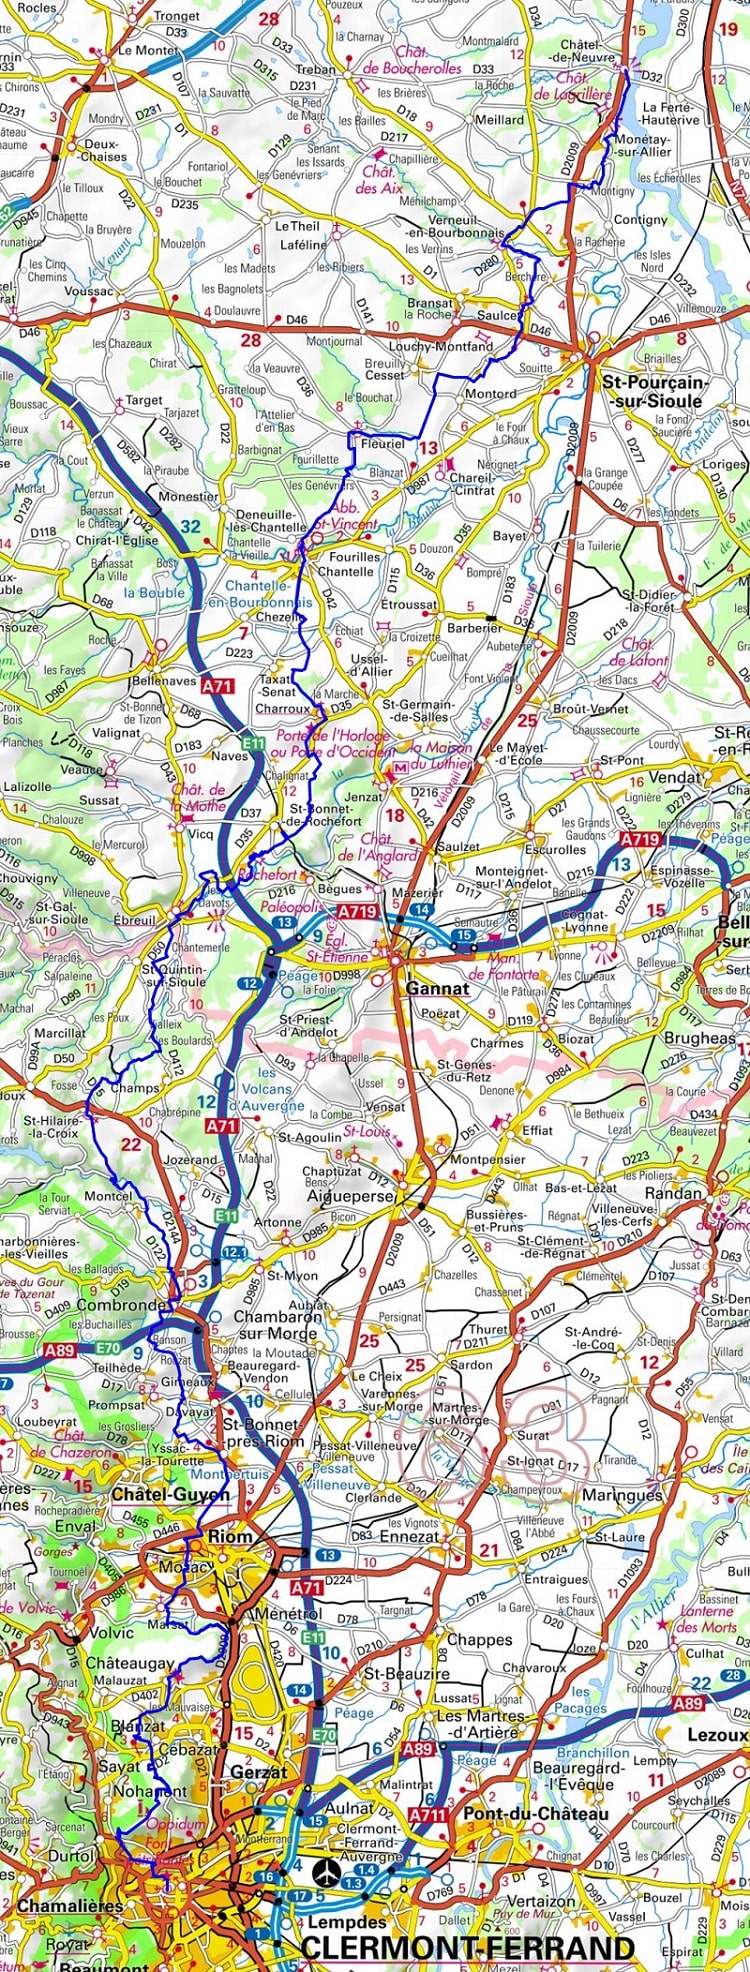 GR300 Hiking from Chatel-de-Neuvre (Allier) to Clermont-Ferrand (Puy-de-Dome) 1